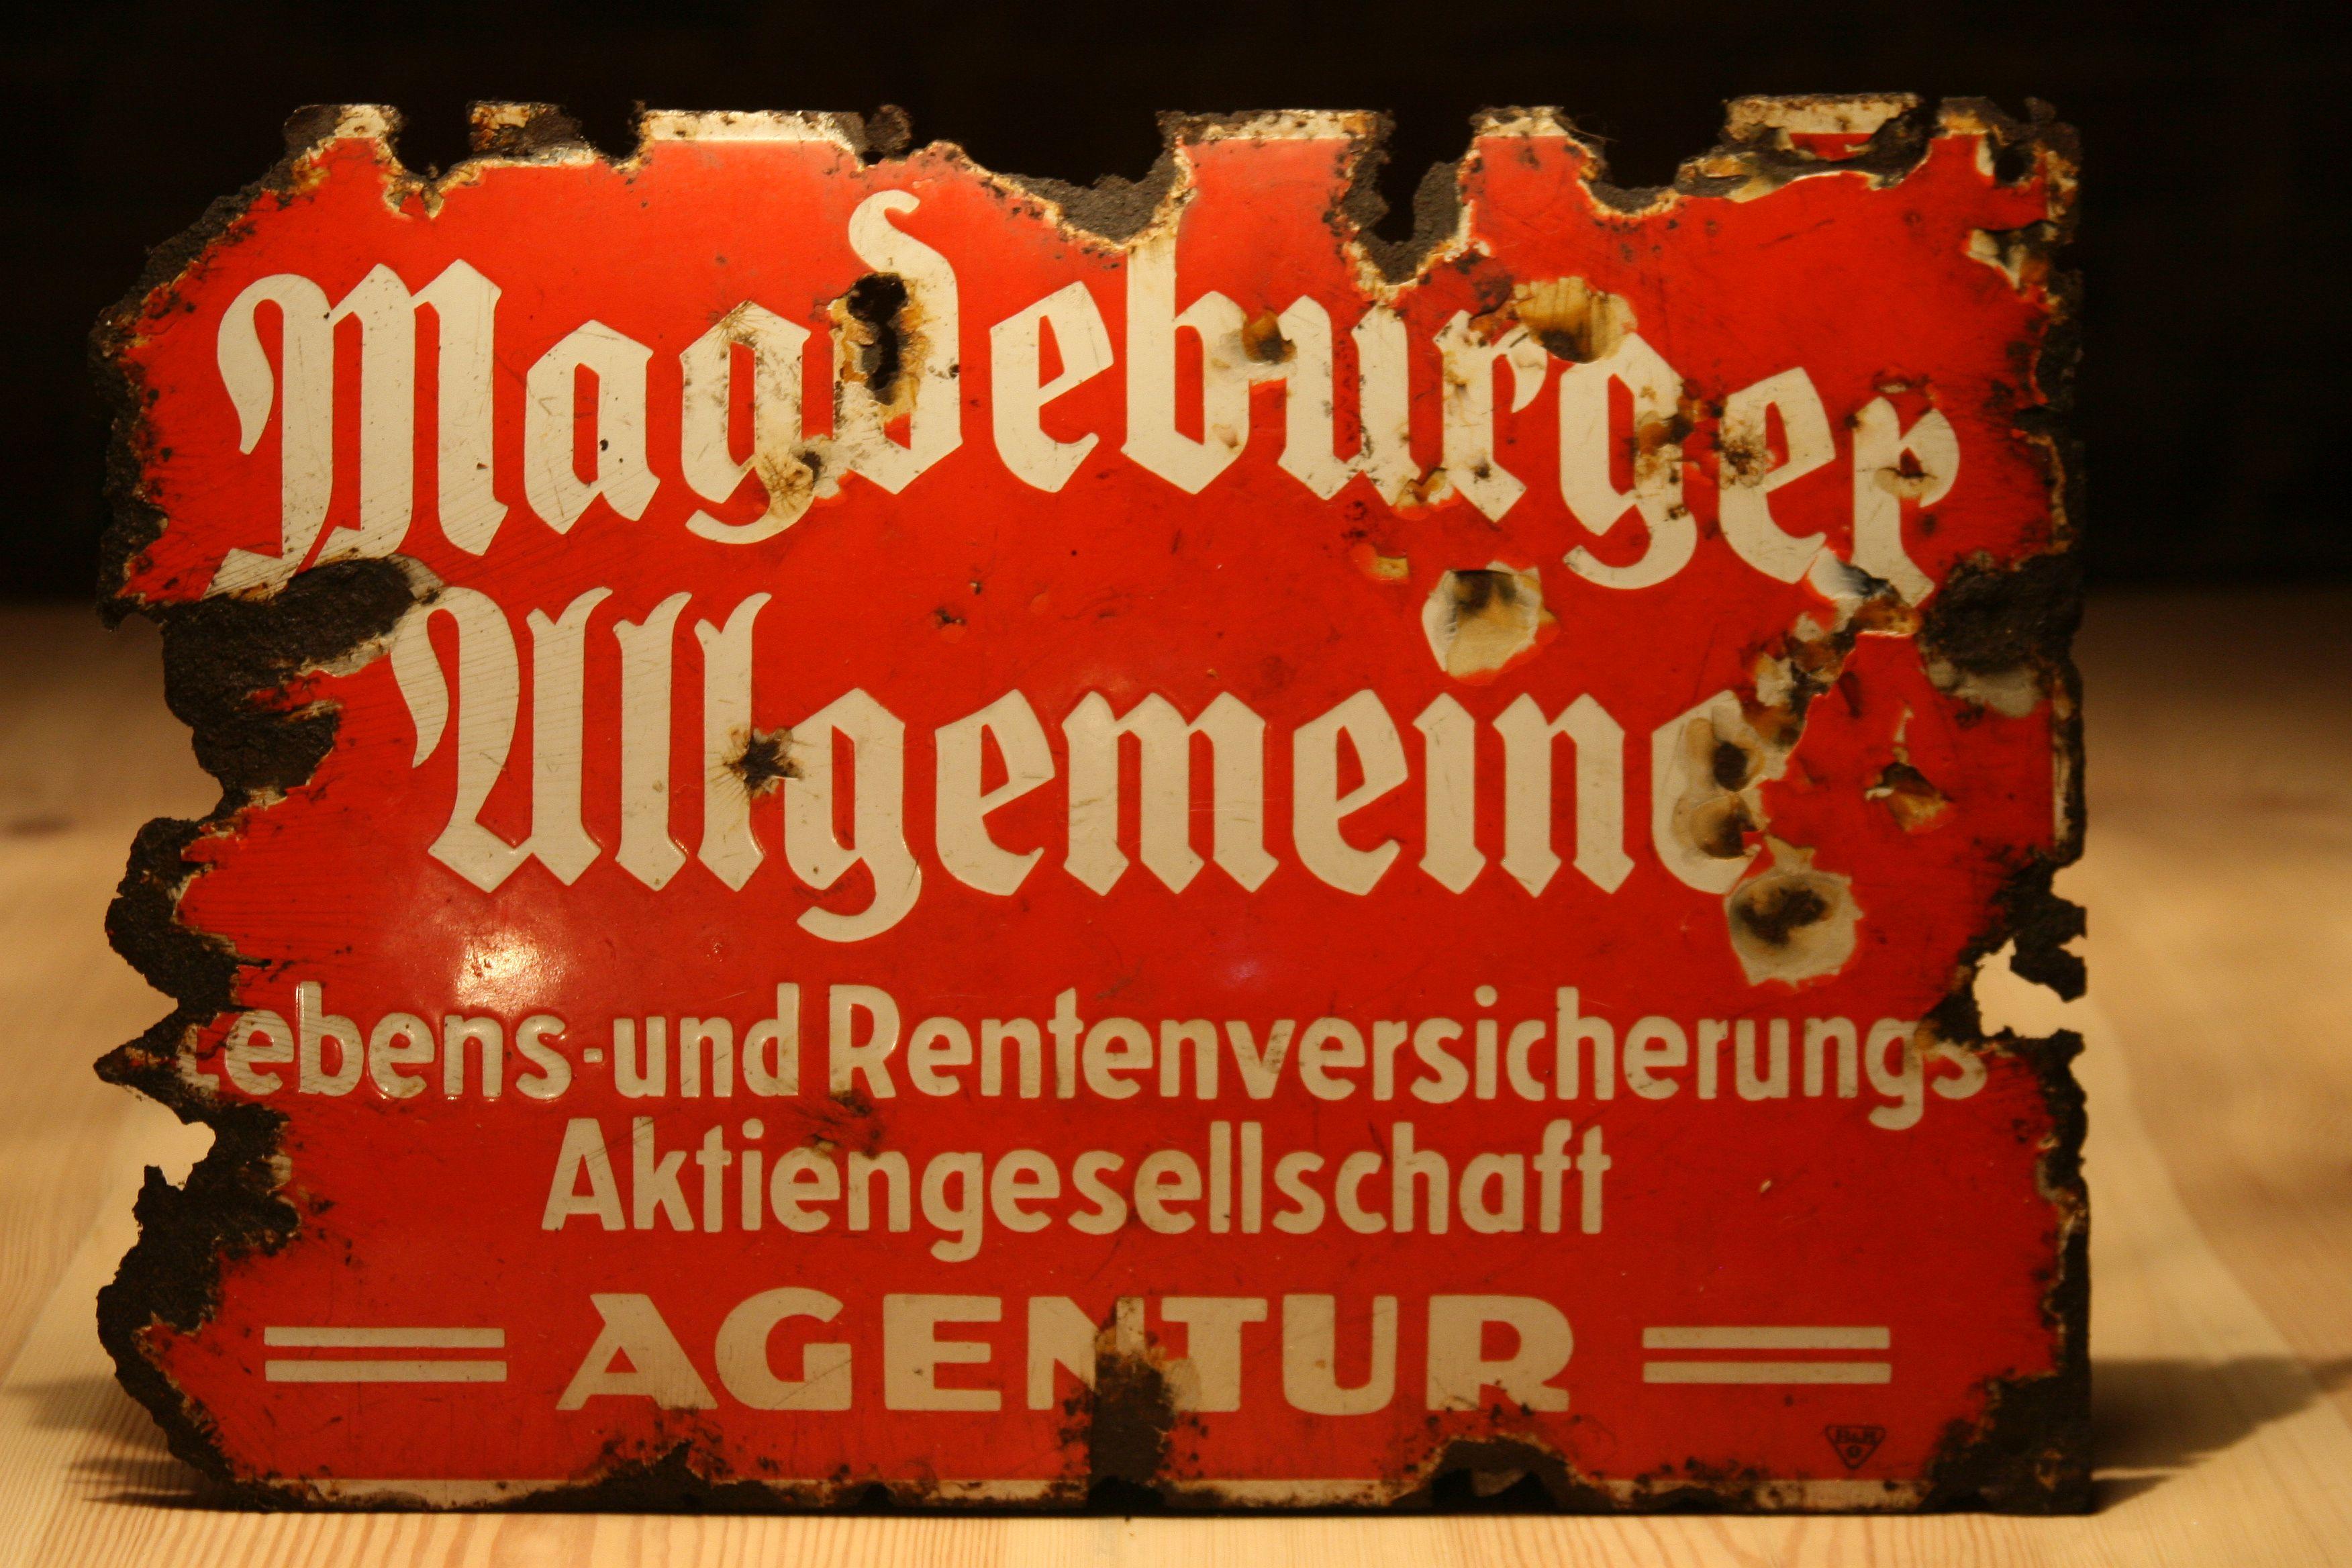 An original, 1930s German signboard of Magdeburg's joint stock company for life and retirement insurance.
Construction:
Pressed convex steel sheet covered with two-colored enamel. B & H, producer's signatures visible in the lower right